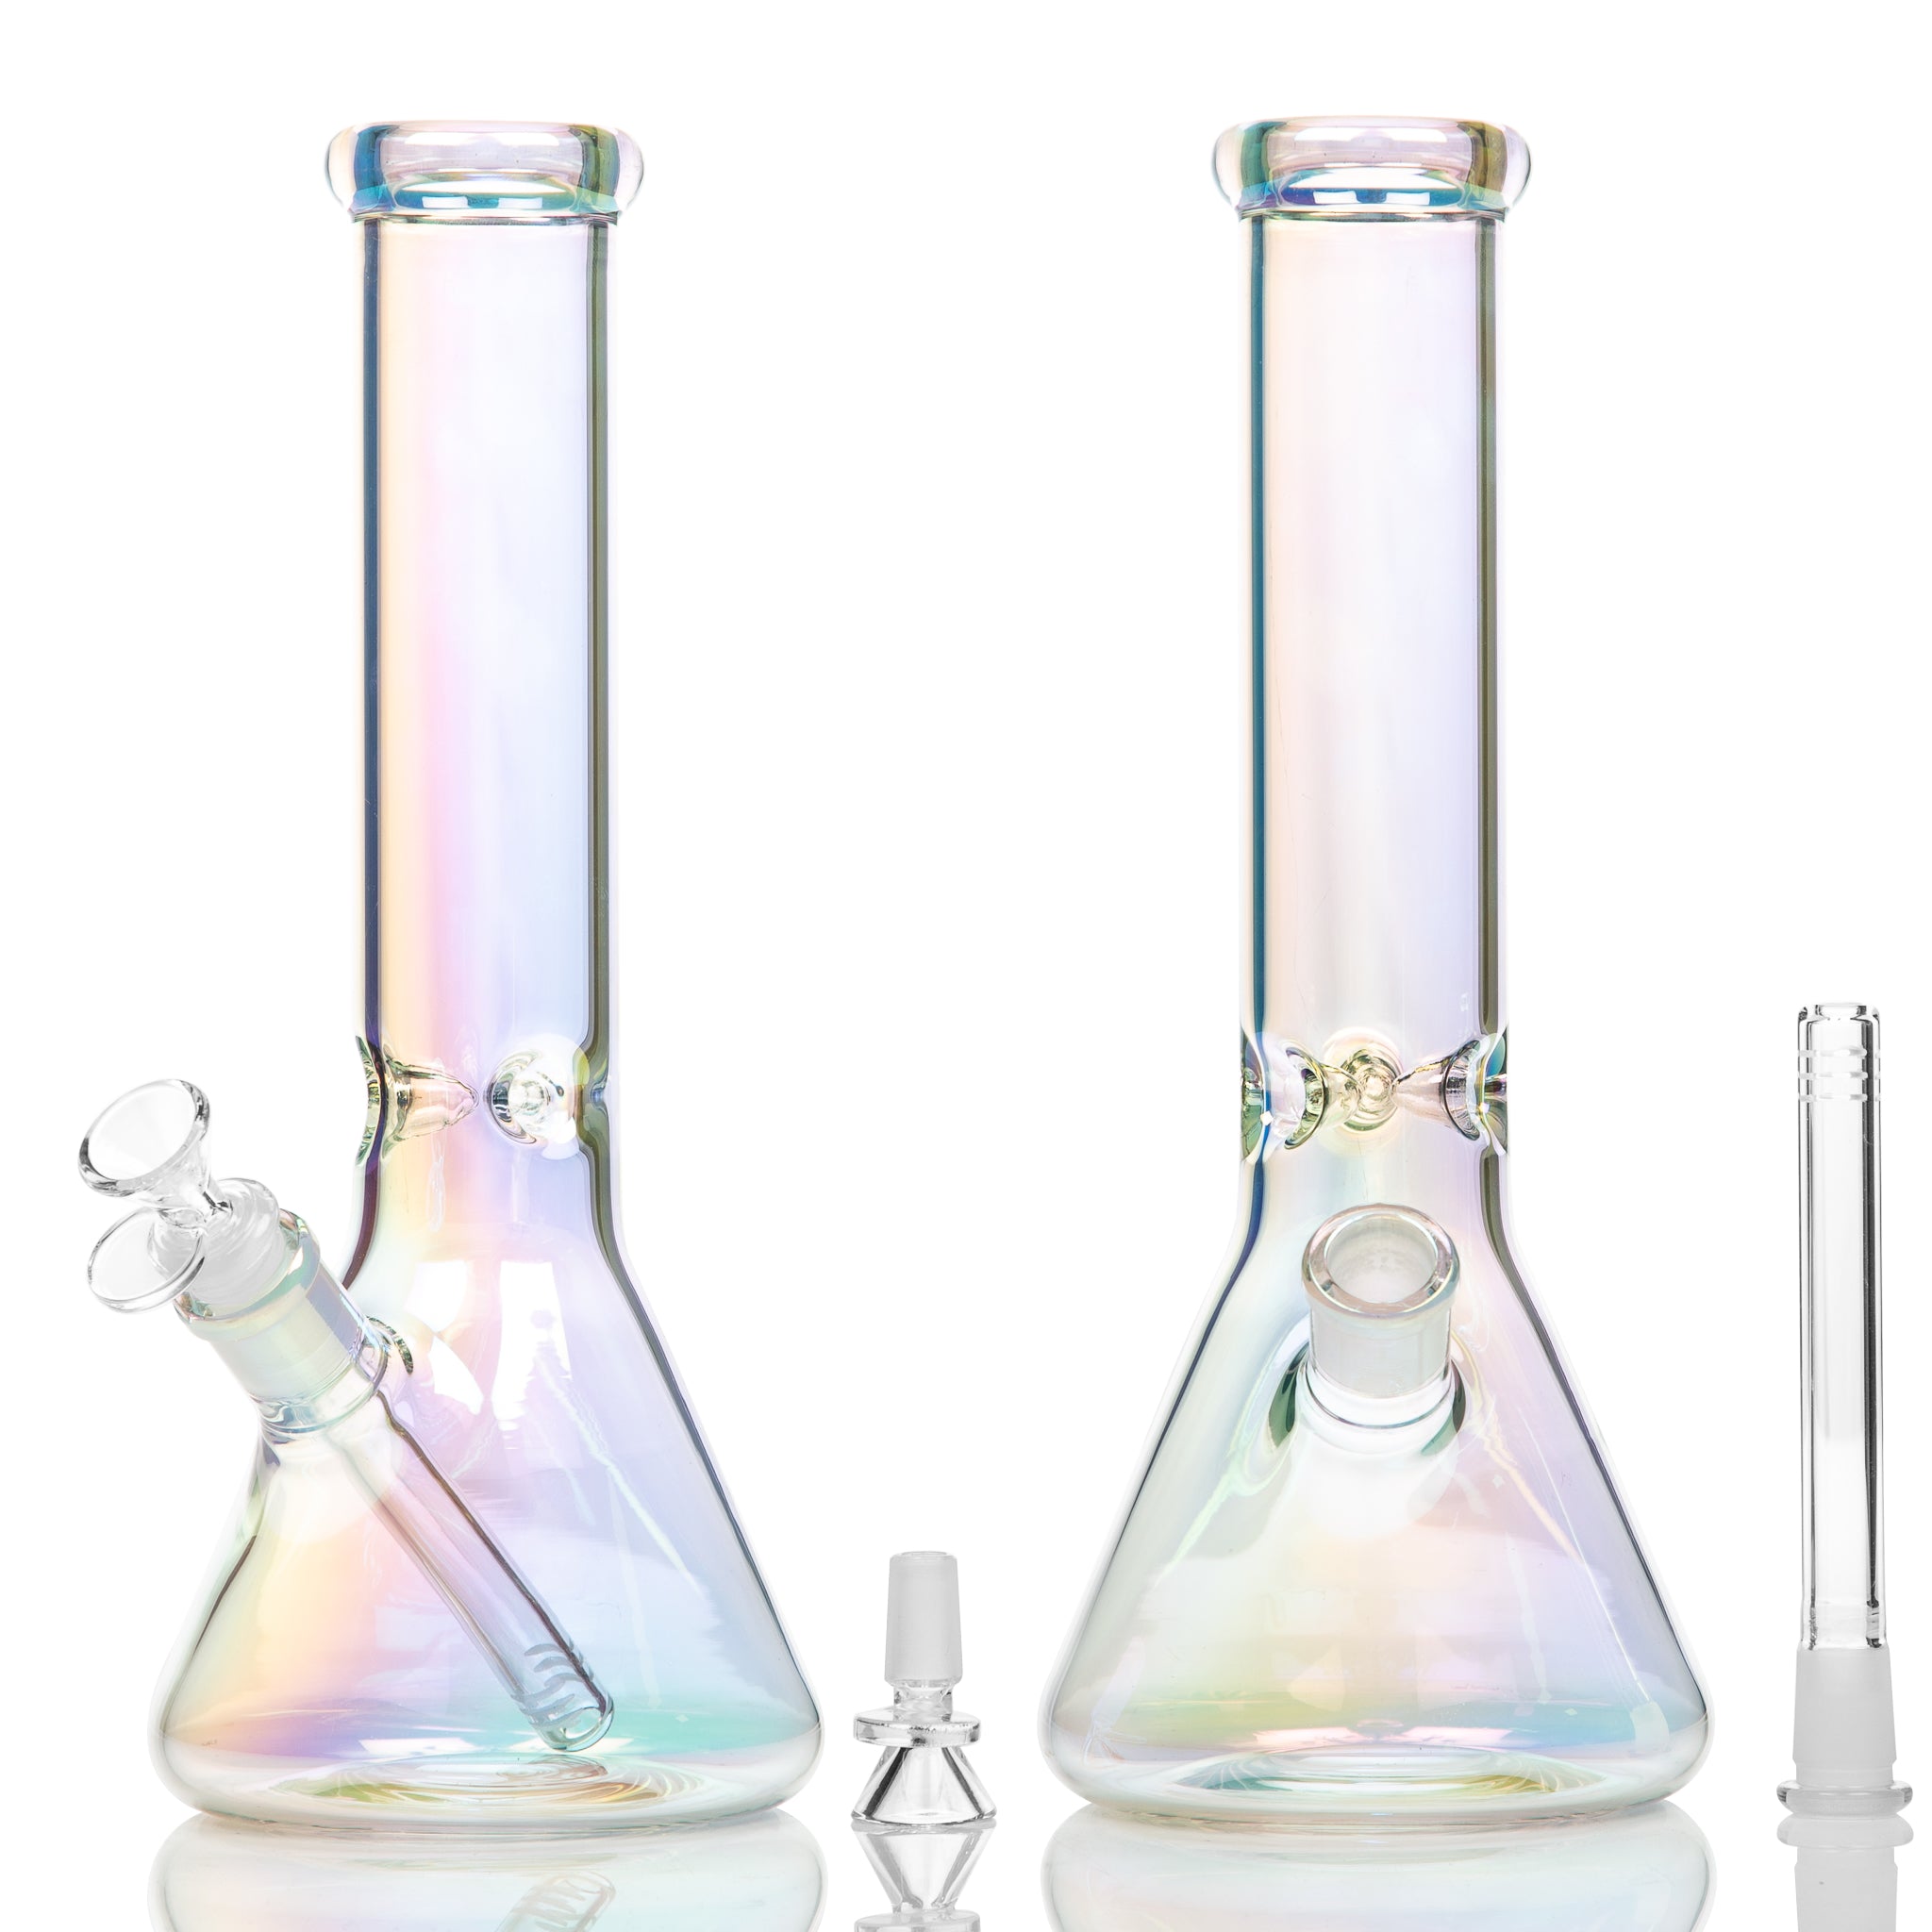 31cm cheap bong with attractive effect and very popular with Australian cannabis users.